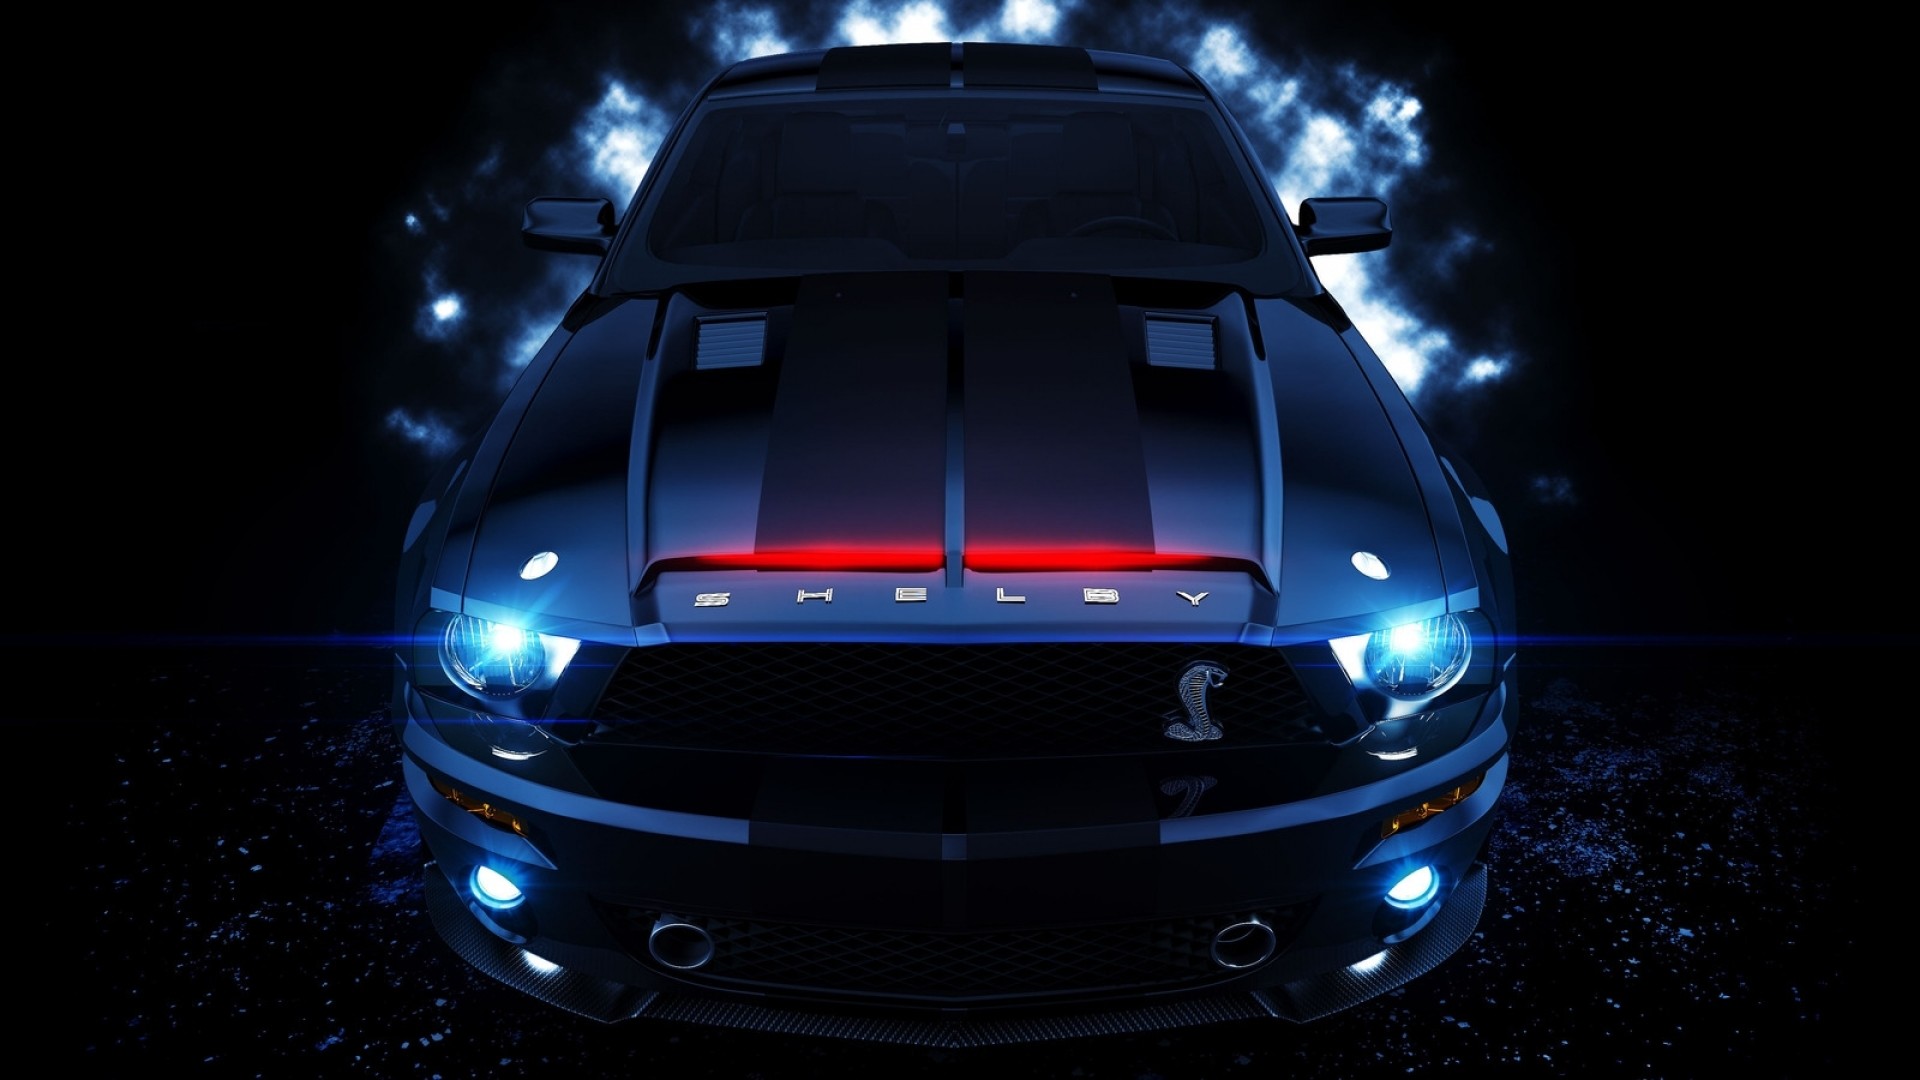 1920x1080 Ford Mustang Shelby GT500 Full HD Wallpaper